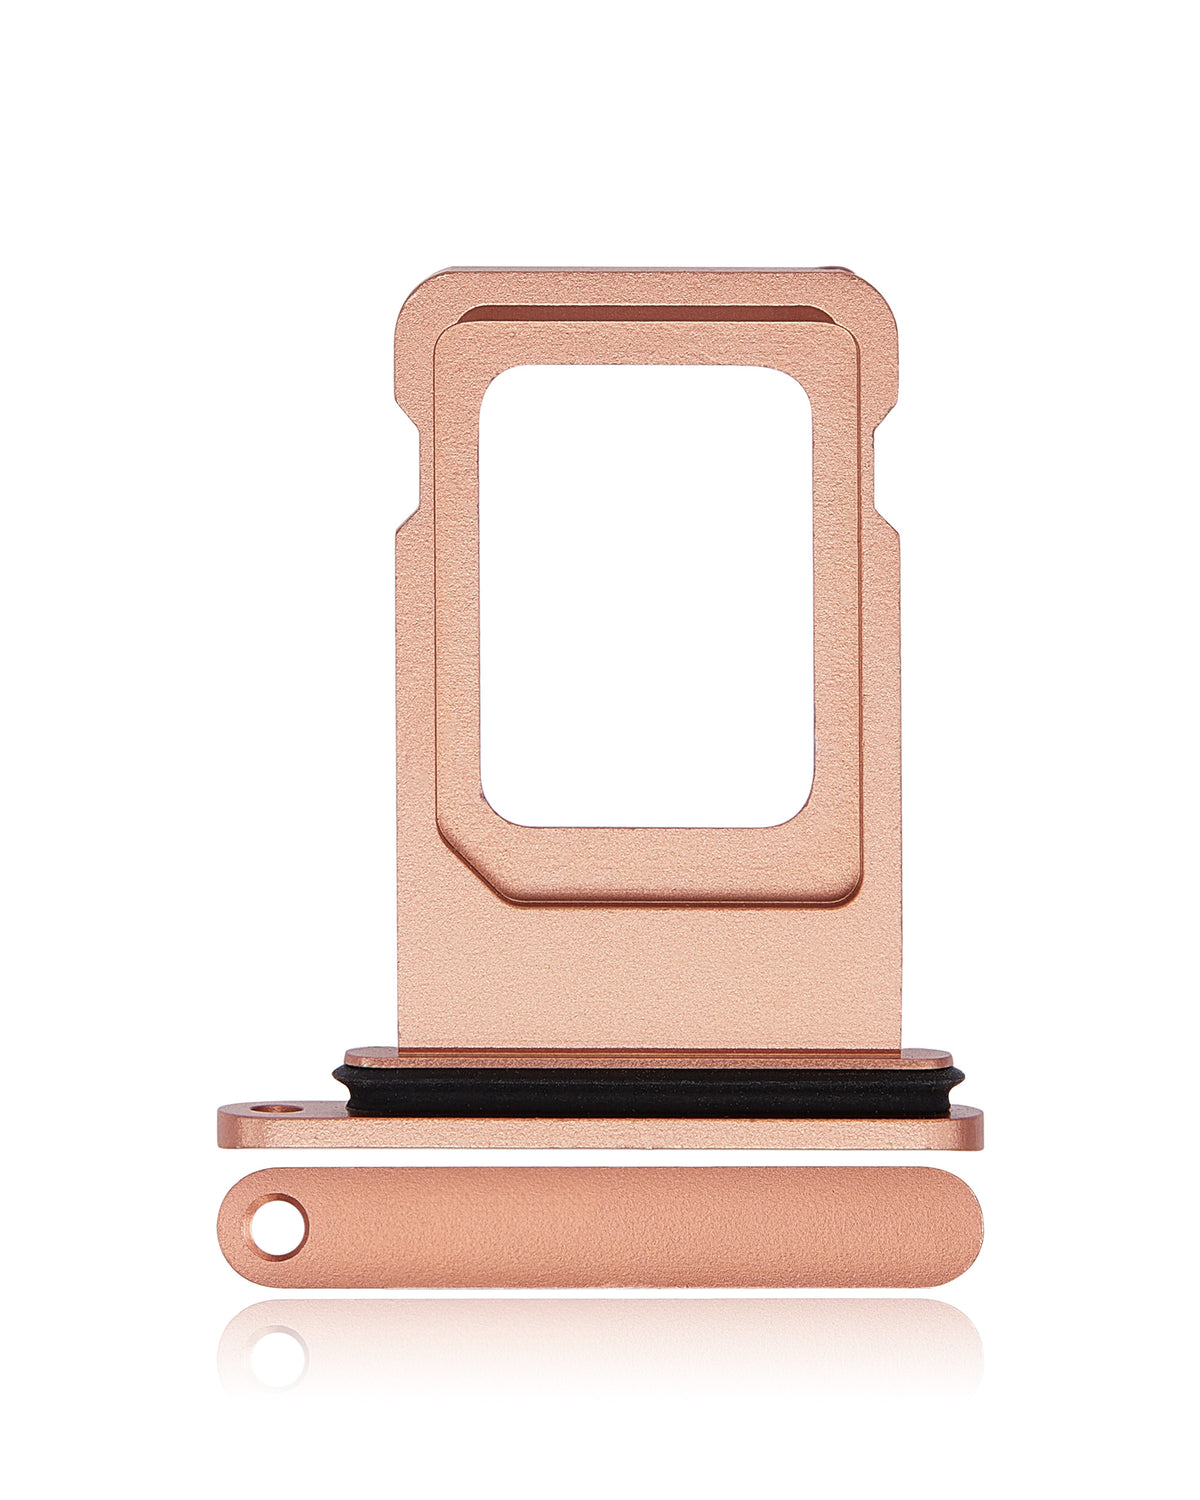 CORAL DUAL SIM CARD TRAY COMPATIBLE WITH IPHONE XR